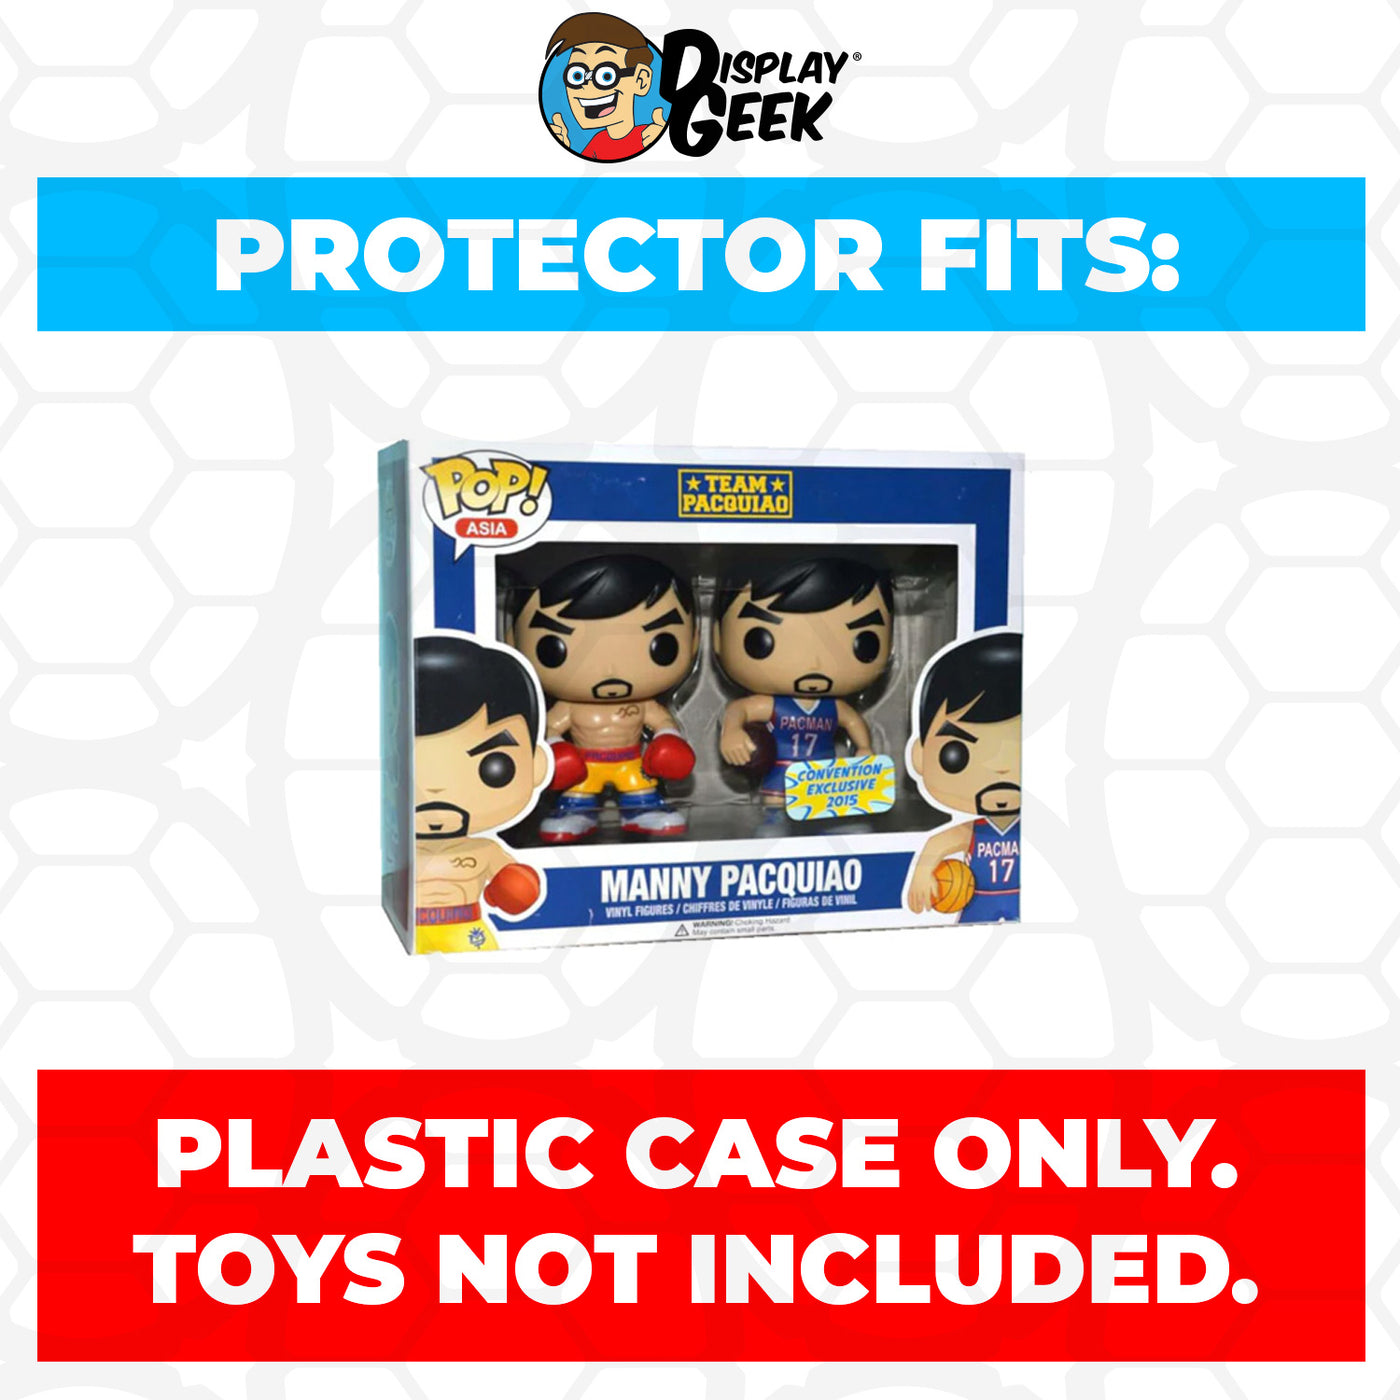 Pop Protector for 2 Pack Manny Pacquiao Boxer & Coach/Player Funko Pop on The Protector Guide App by Display Geek